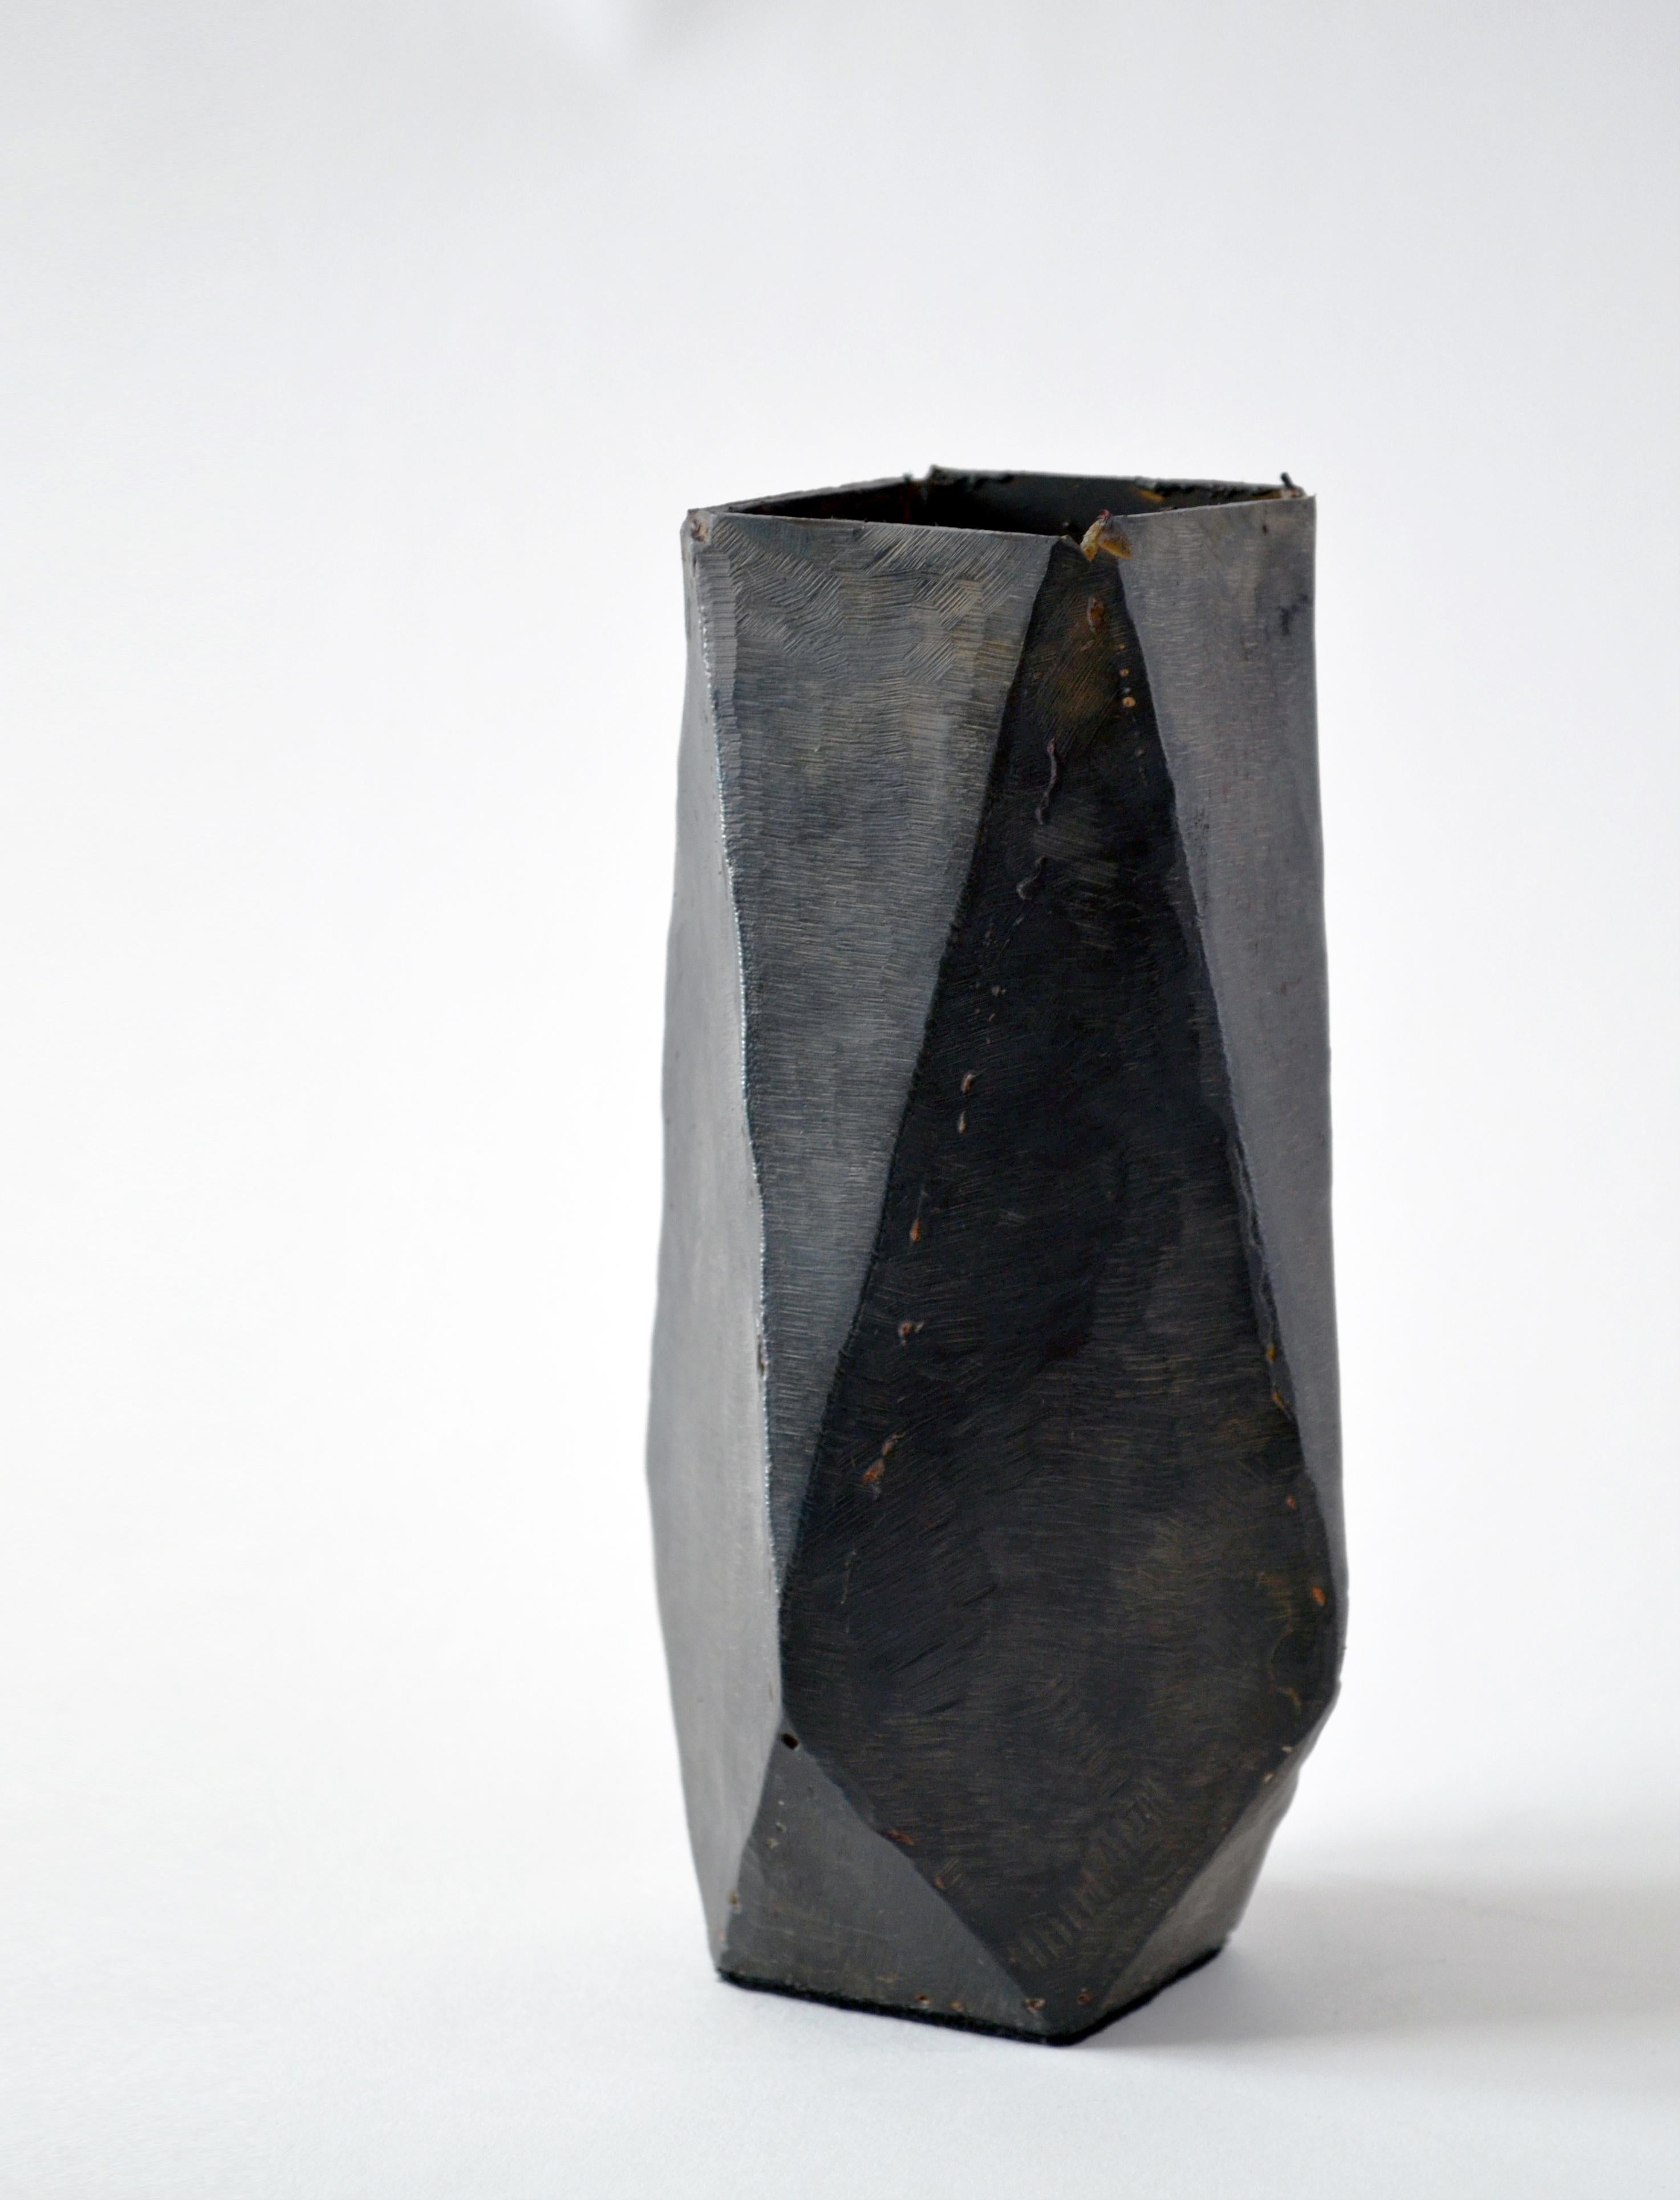 Vessel No 6.
J.M. Szymanski
d. 2017
Blackened and waxed iron

This is a unique architectural object made entirely of iron. J.M. Szymanski uses a unique process of metal sculpting to achieve these dynamic facets. It is finished in a black wax. Not